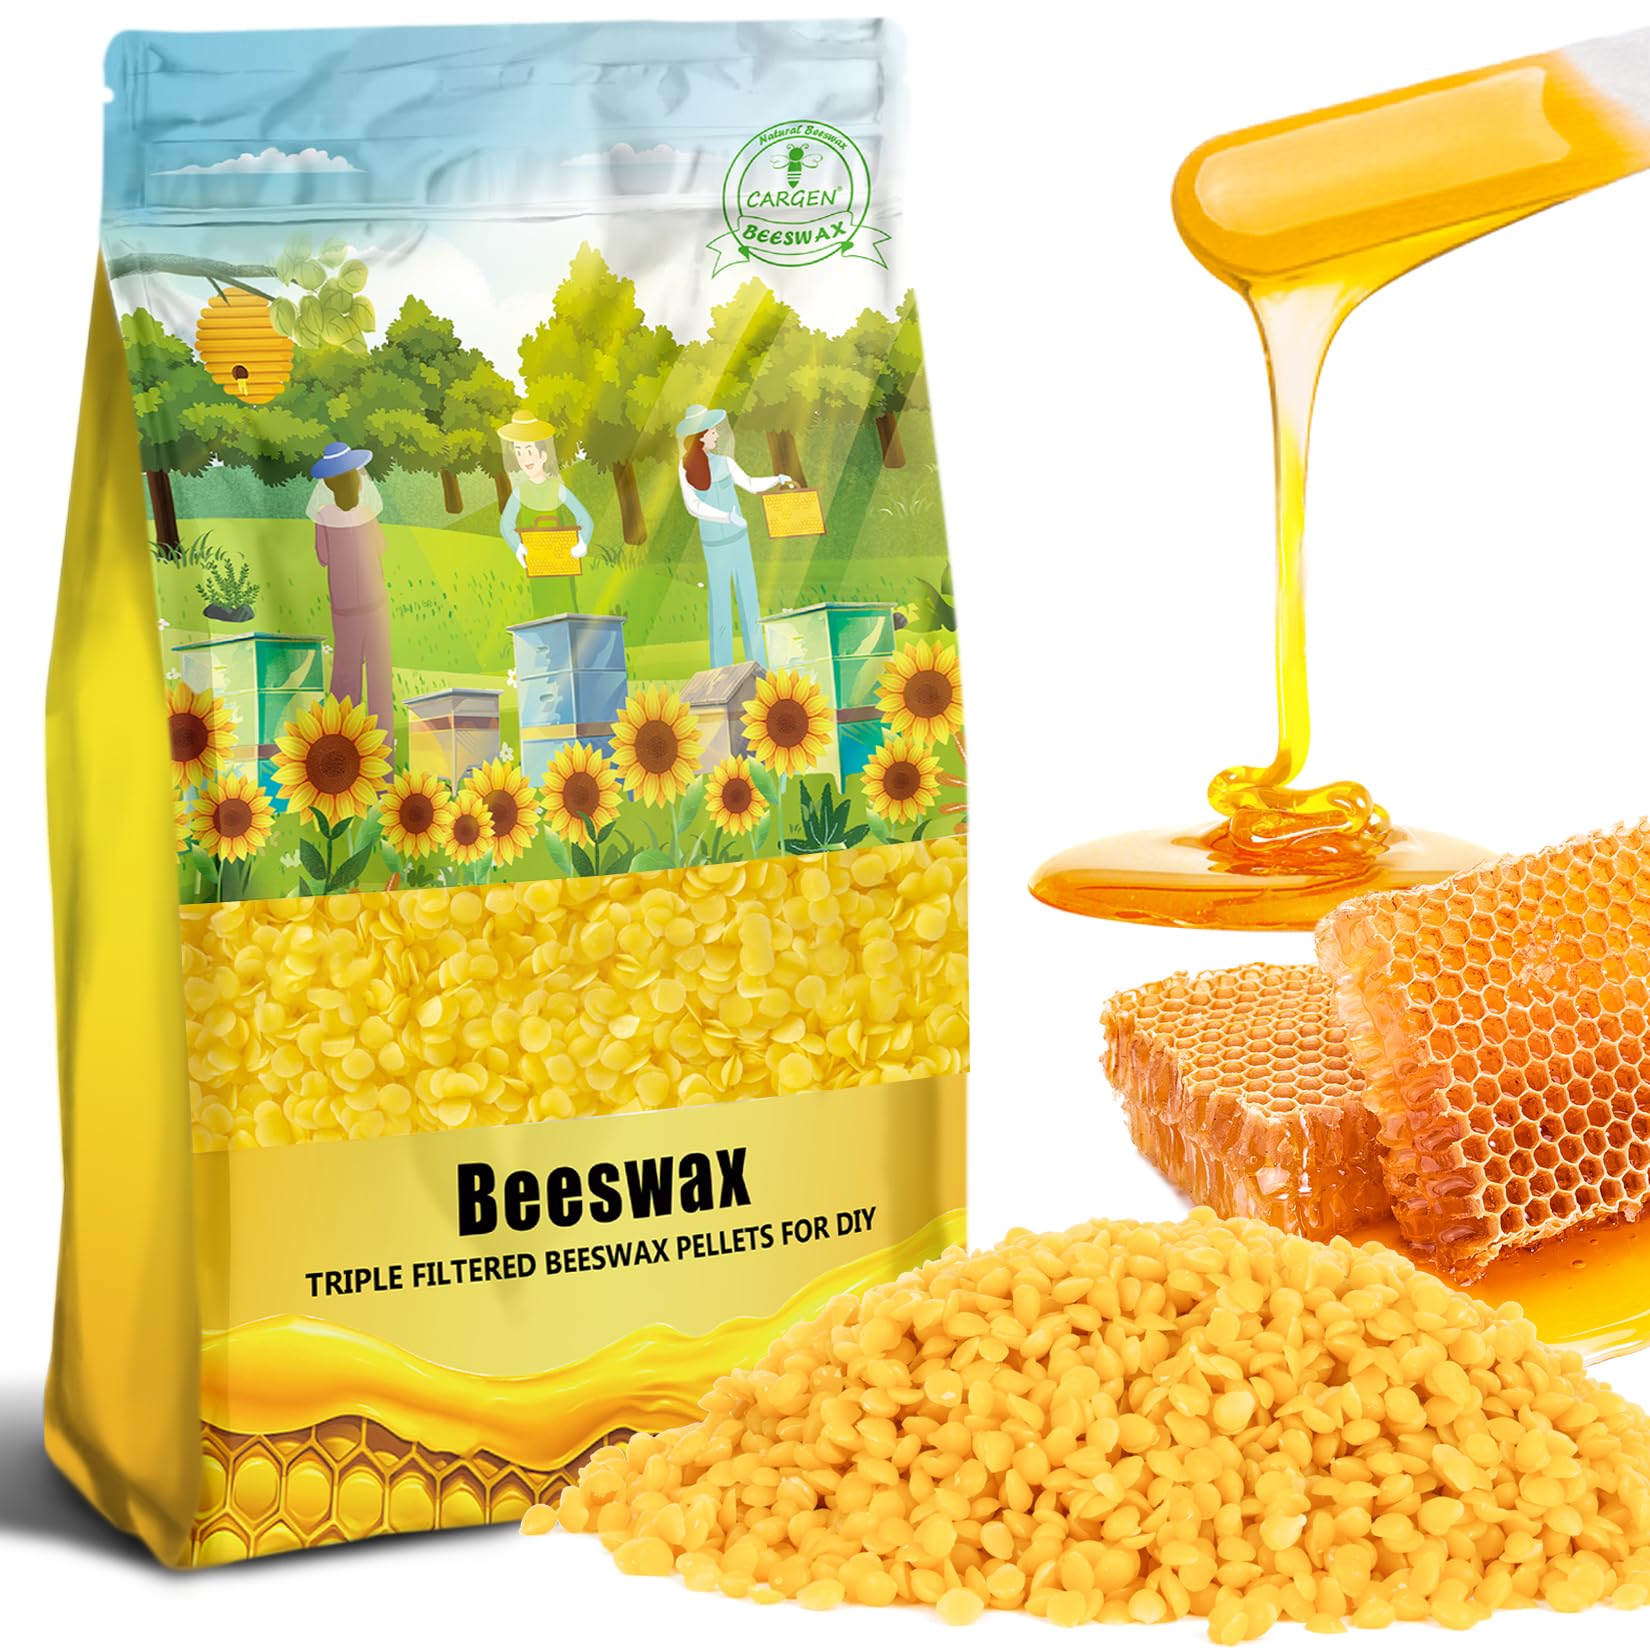 CARGEN Yellow Beeswax Pellets 900g - Beeswax Pastilles Pure Bulk Bees Wax  Pellets Beeswax Beads Triple Filtered for DIY Beewax M